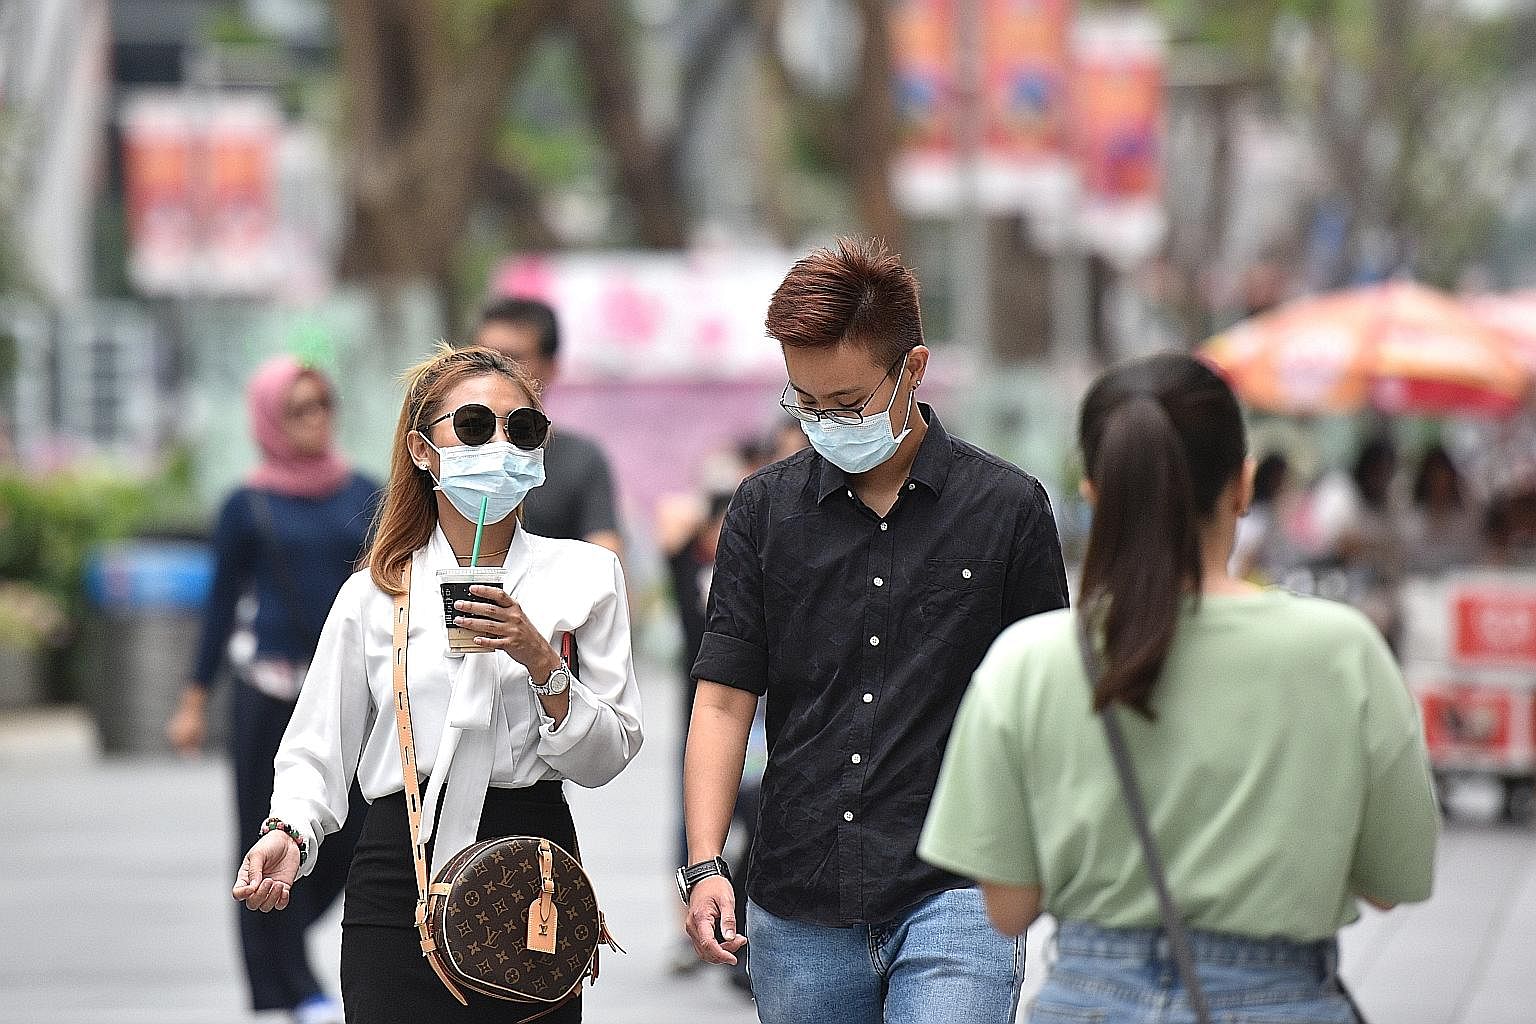 The generosity some Singaporeans have shown is not limited to government-issued masks, says the writer. There are stories of kindness popping up on social media of people giving away masks to others who may need them more.